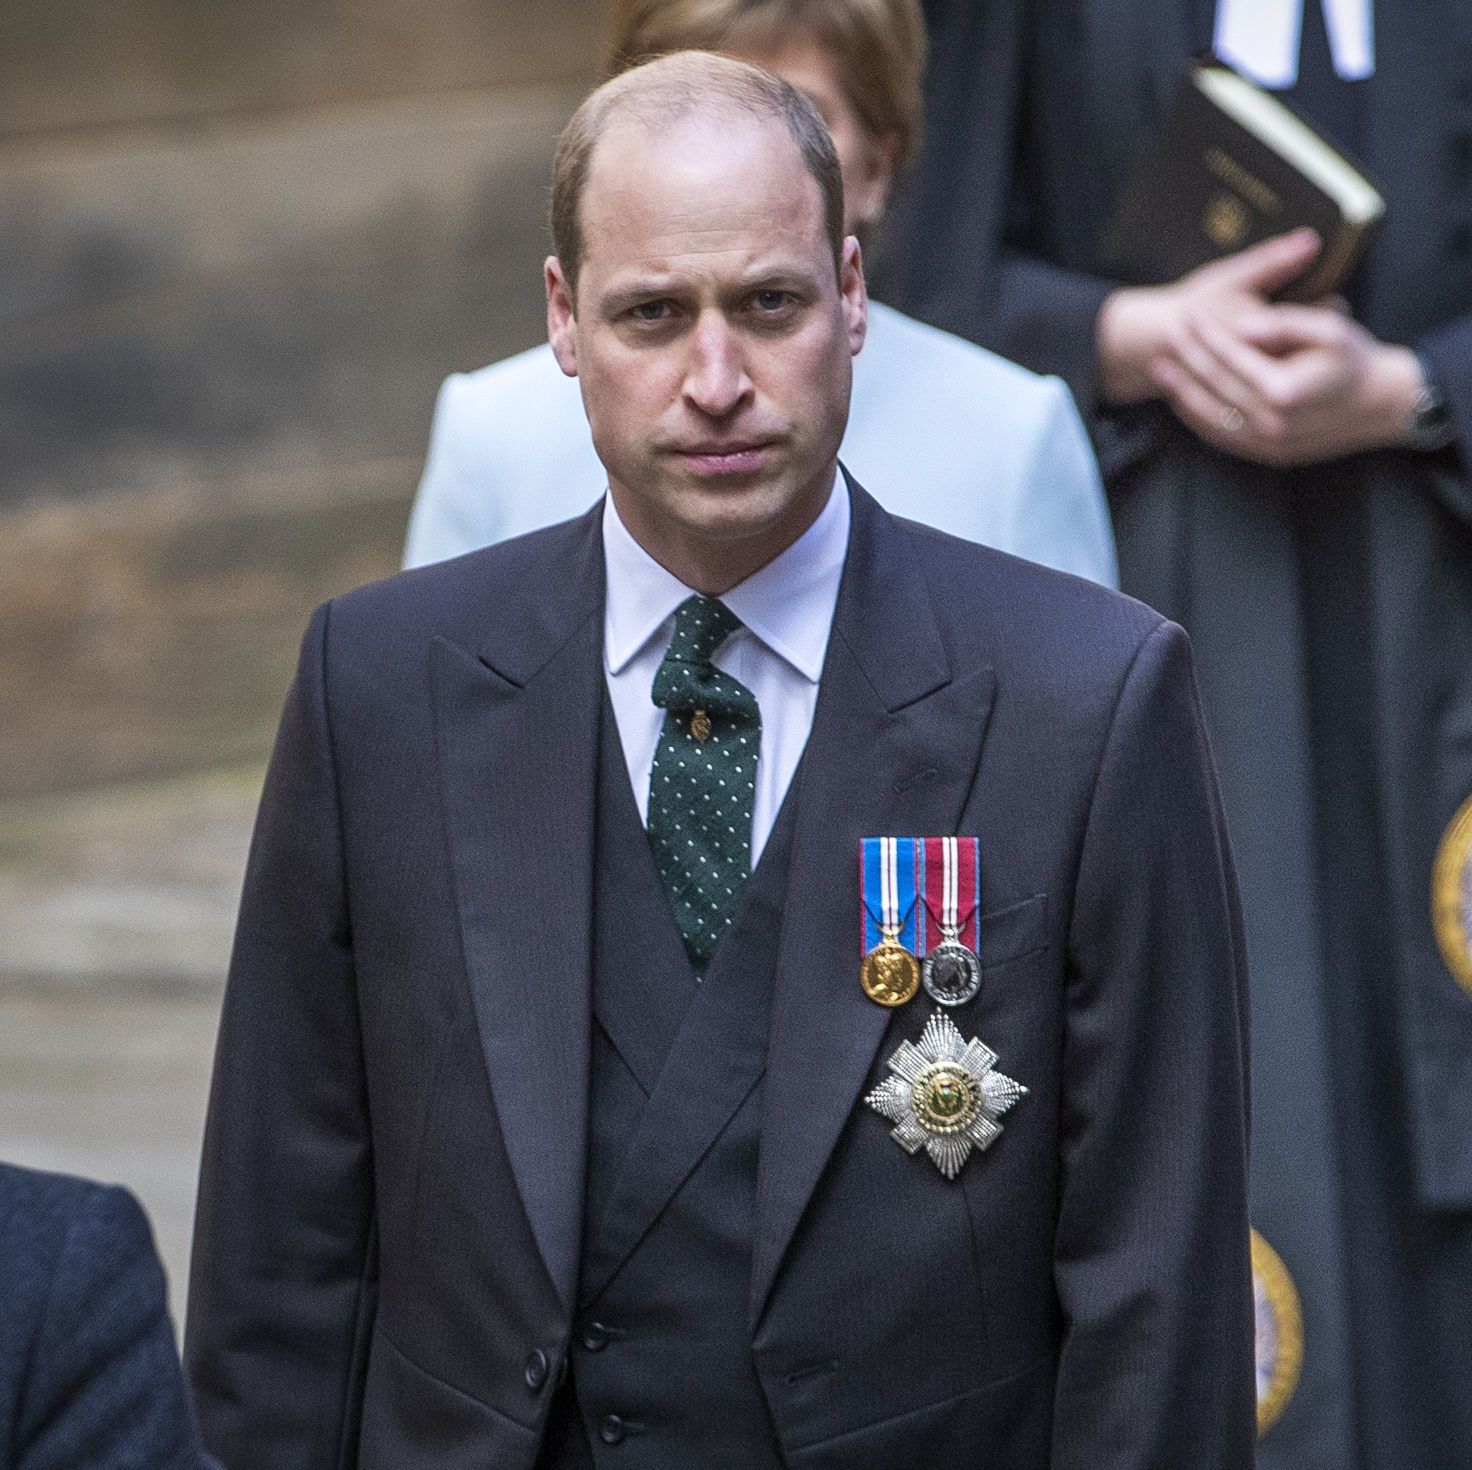 Prince William Is 